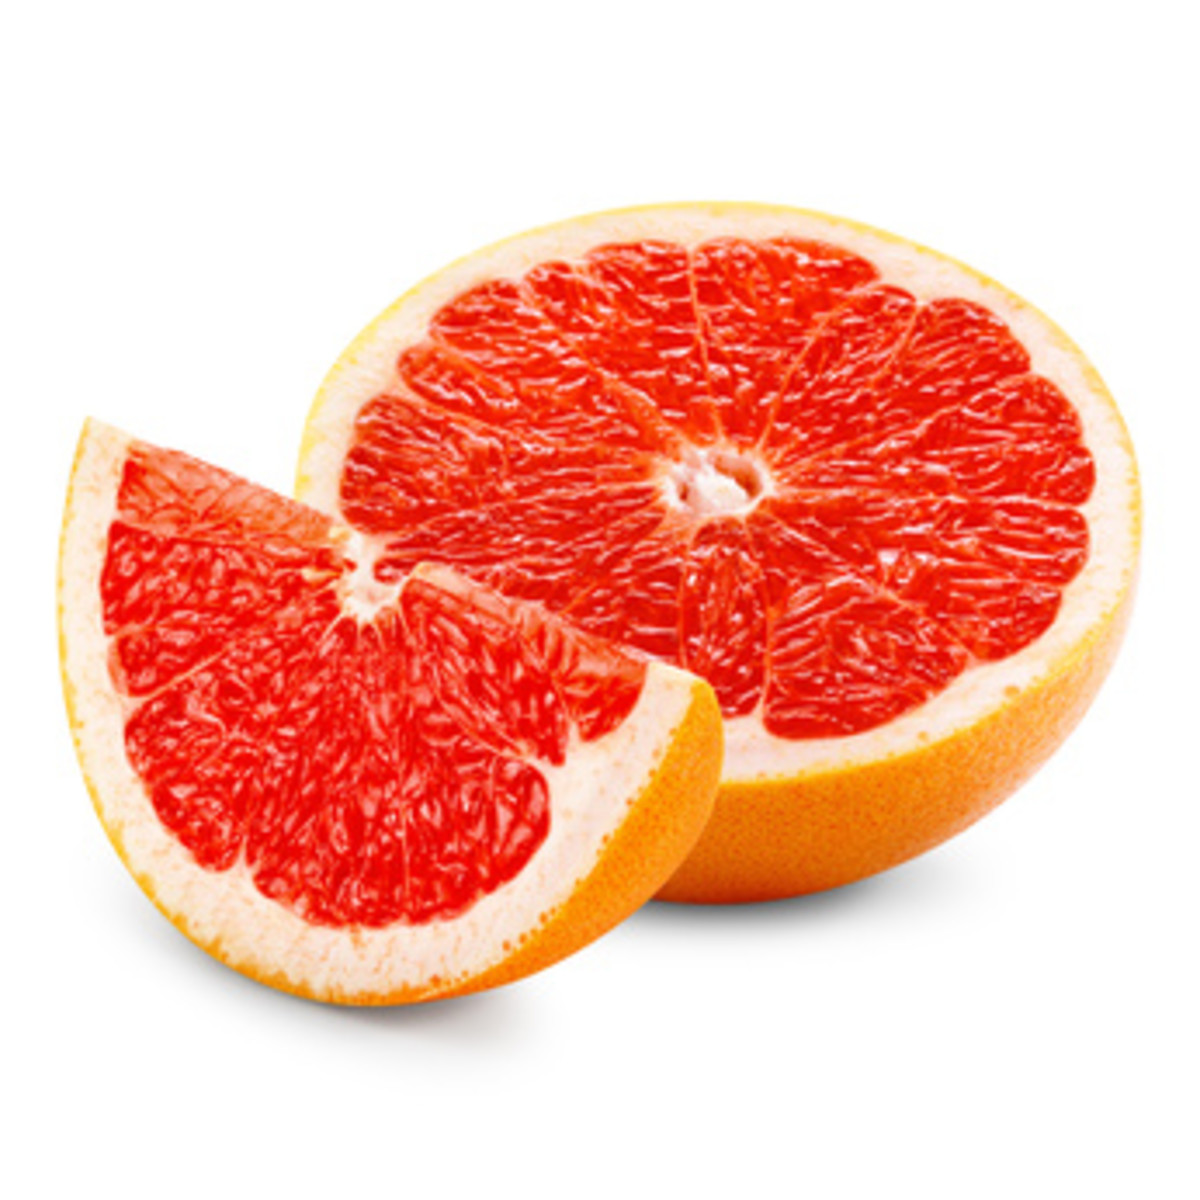 Have a grapefruit in your 3 day military diet.